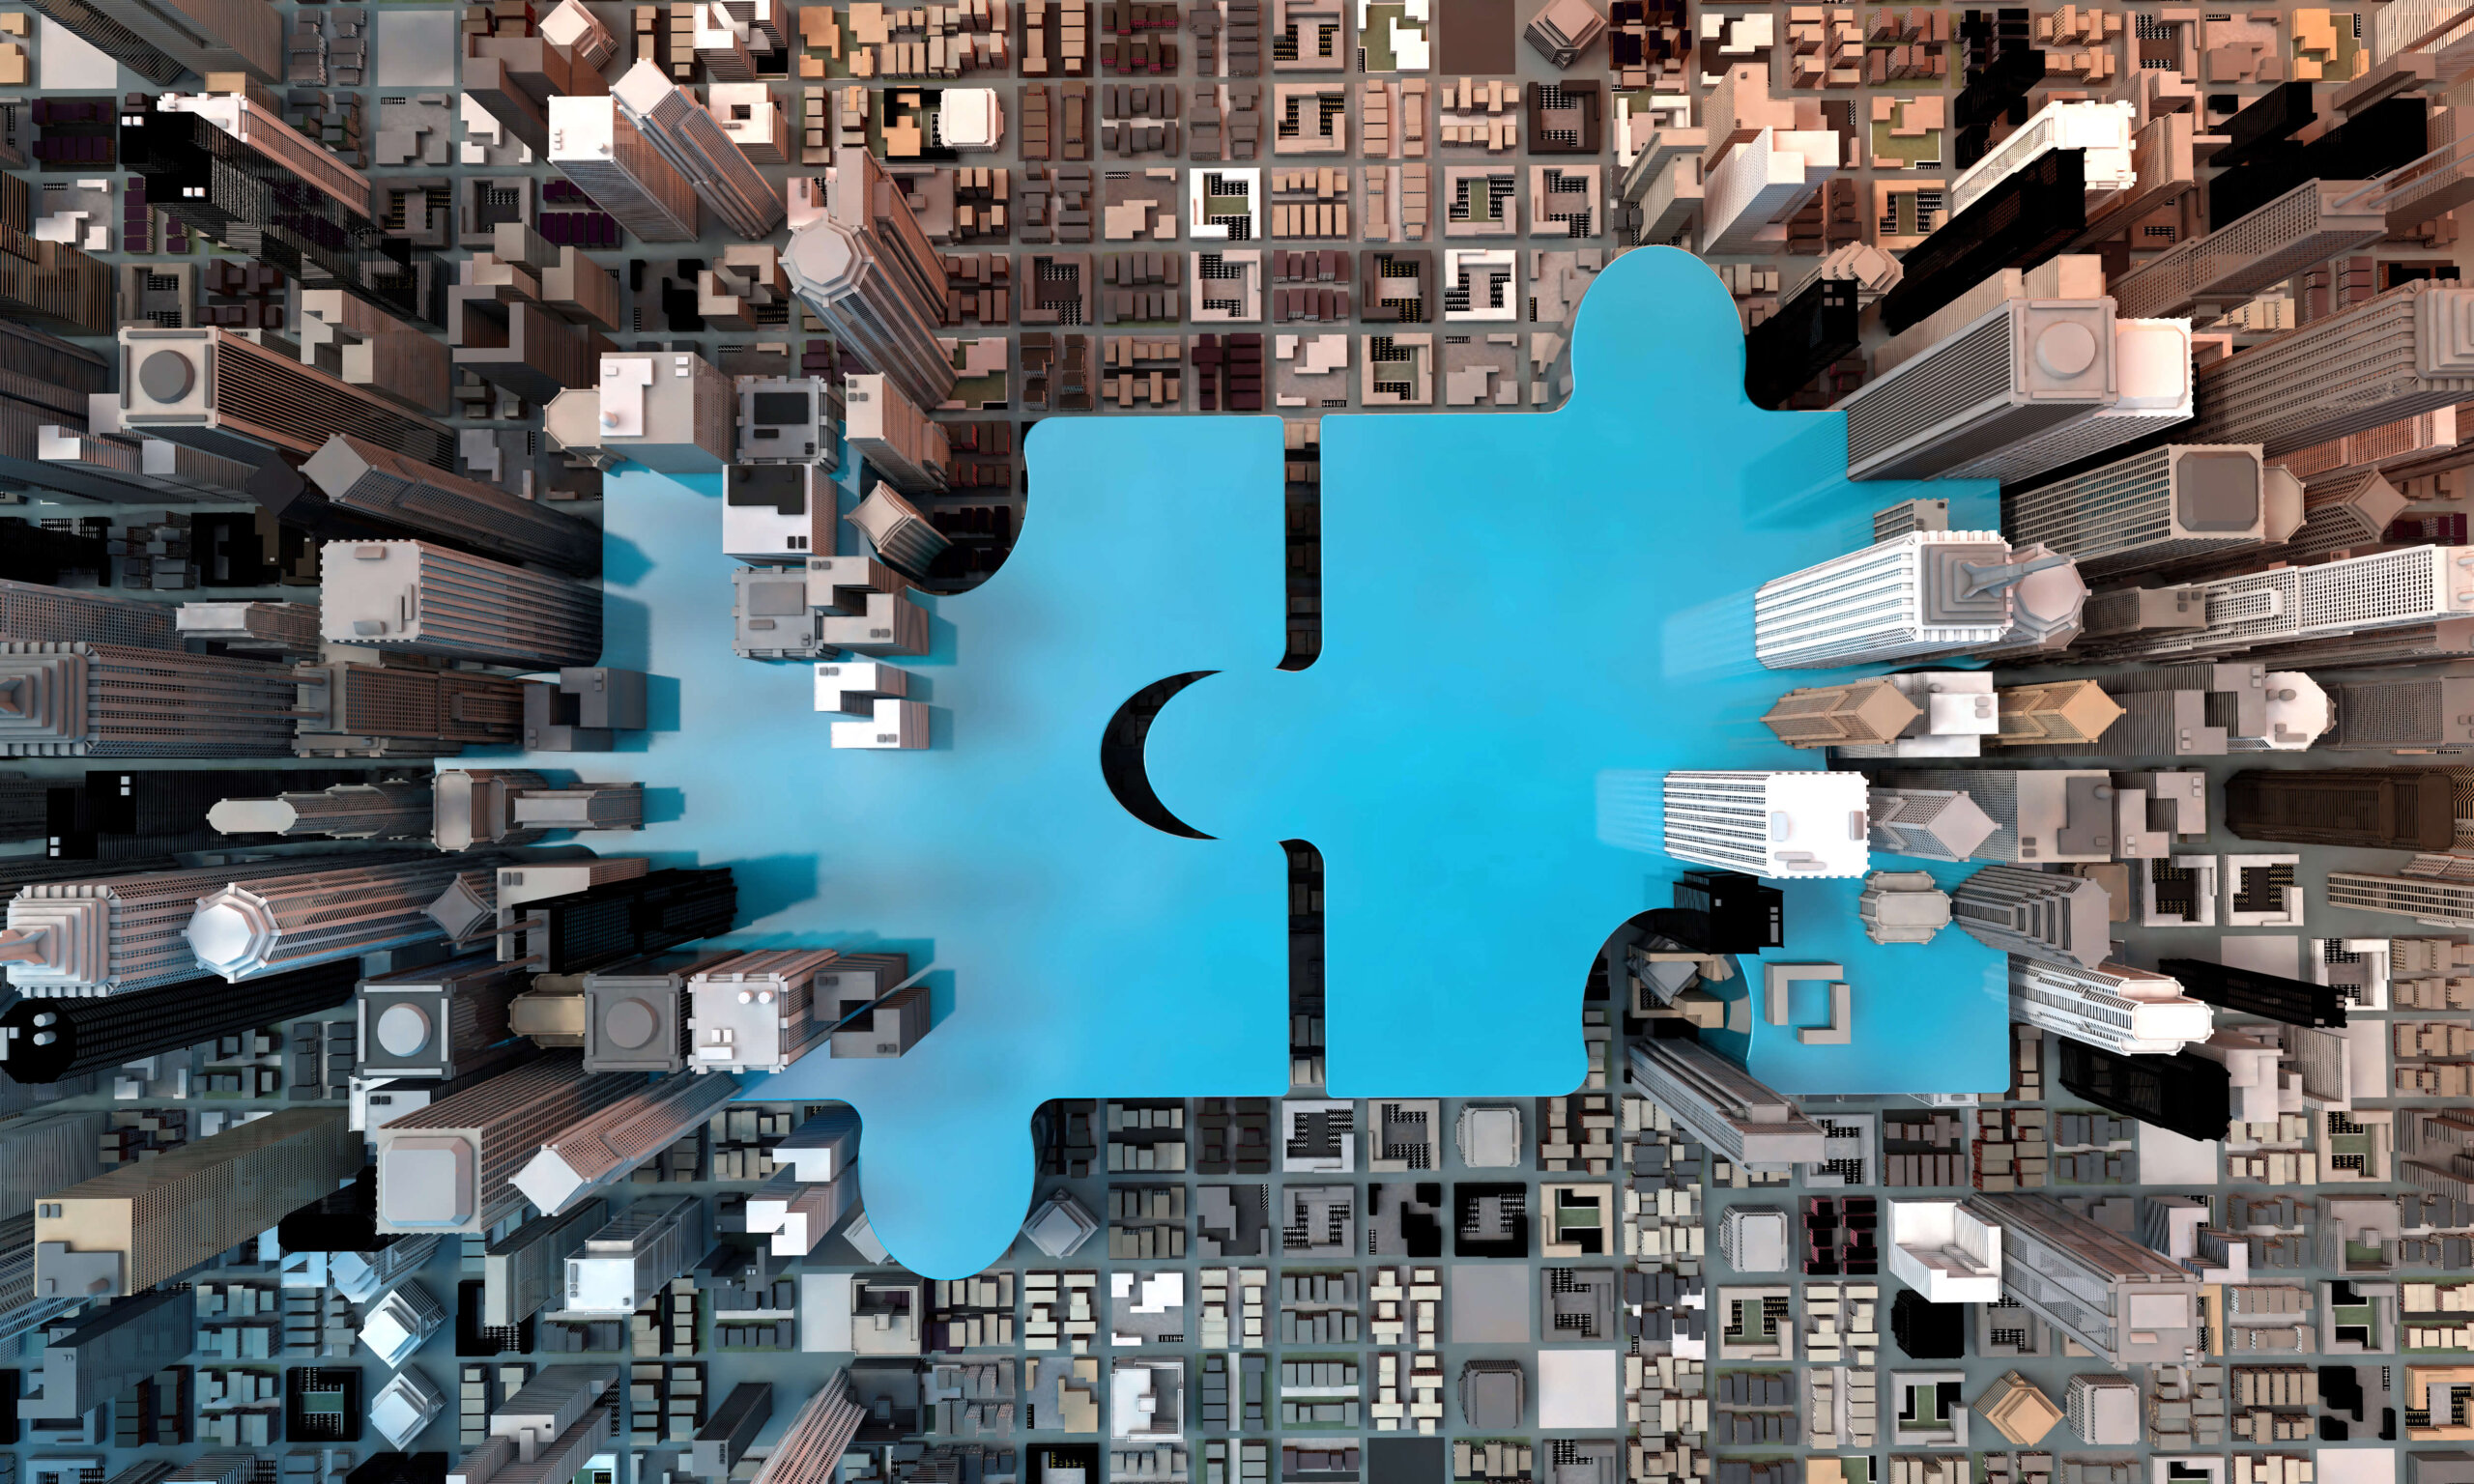 Skyline from bird's eye view with graphic of two blue puzzle pieces.